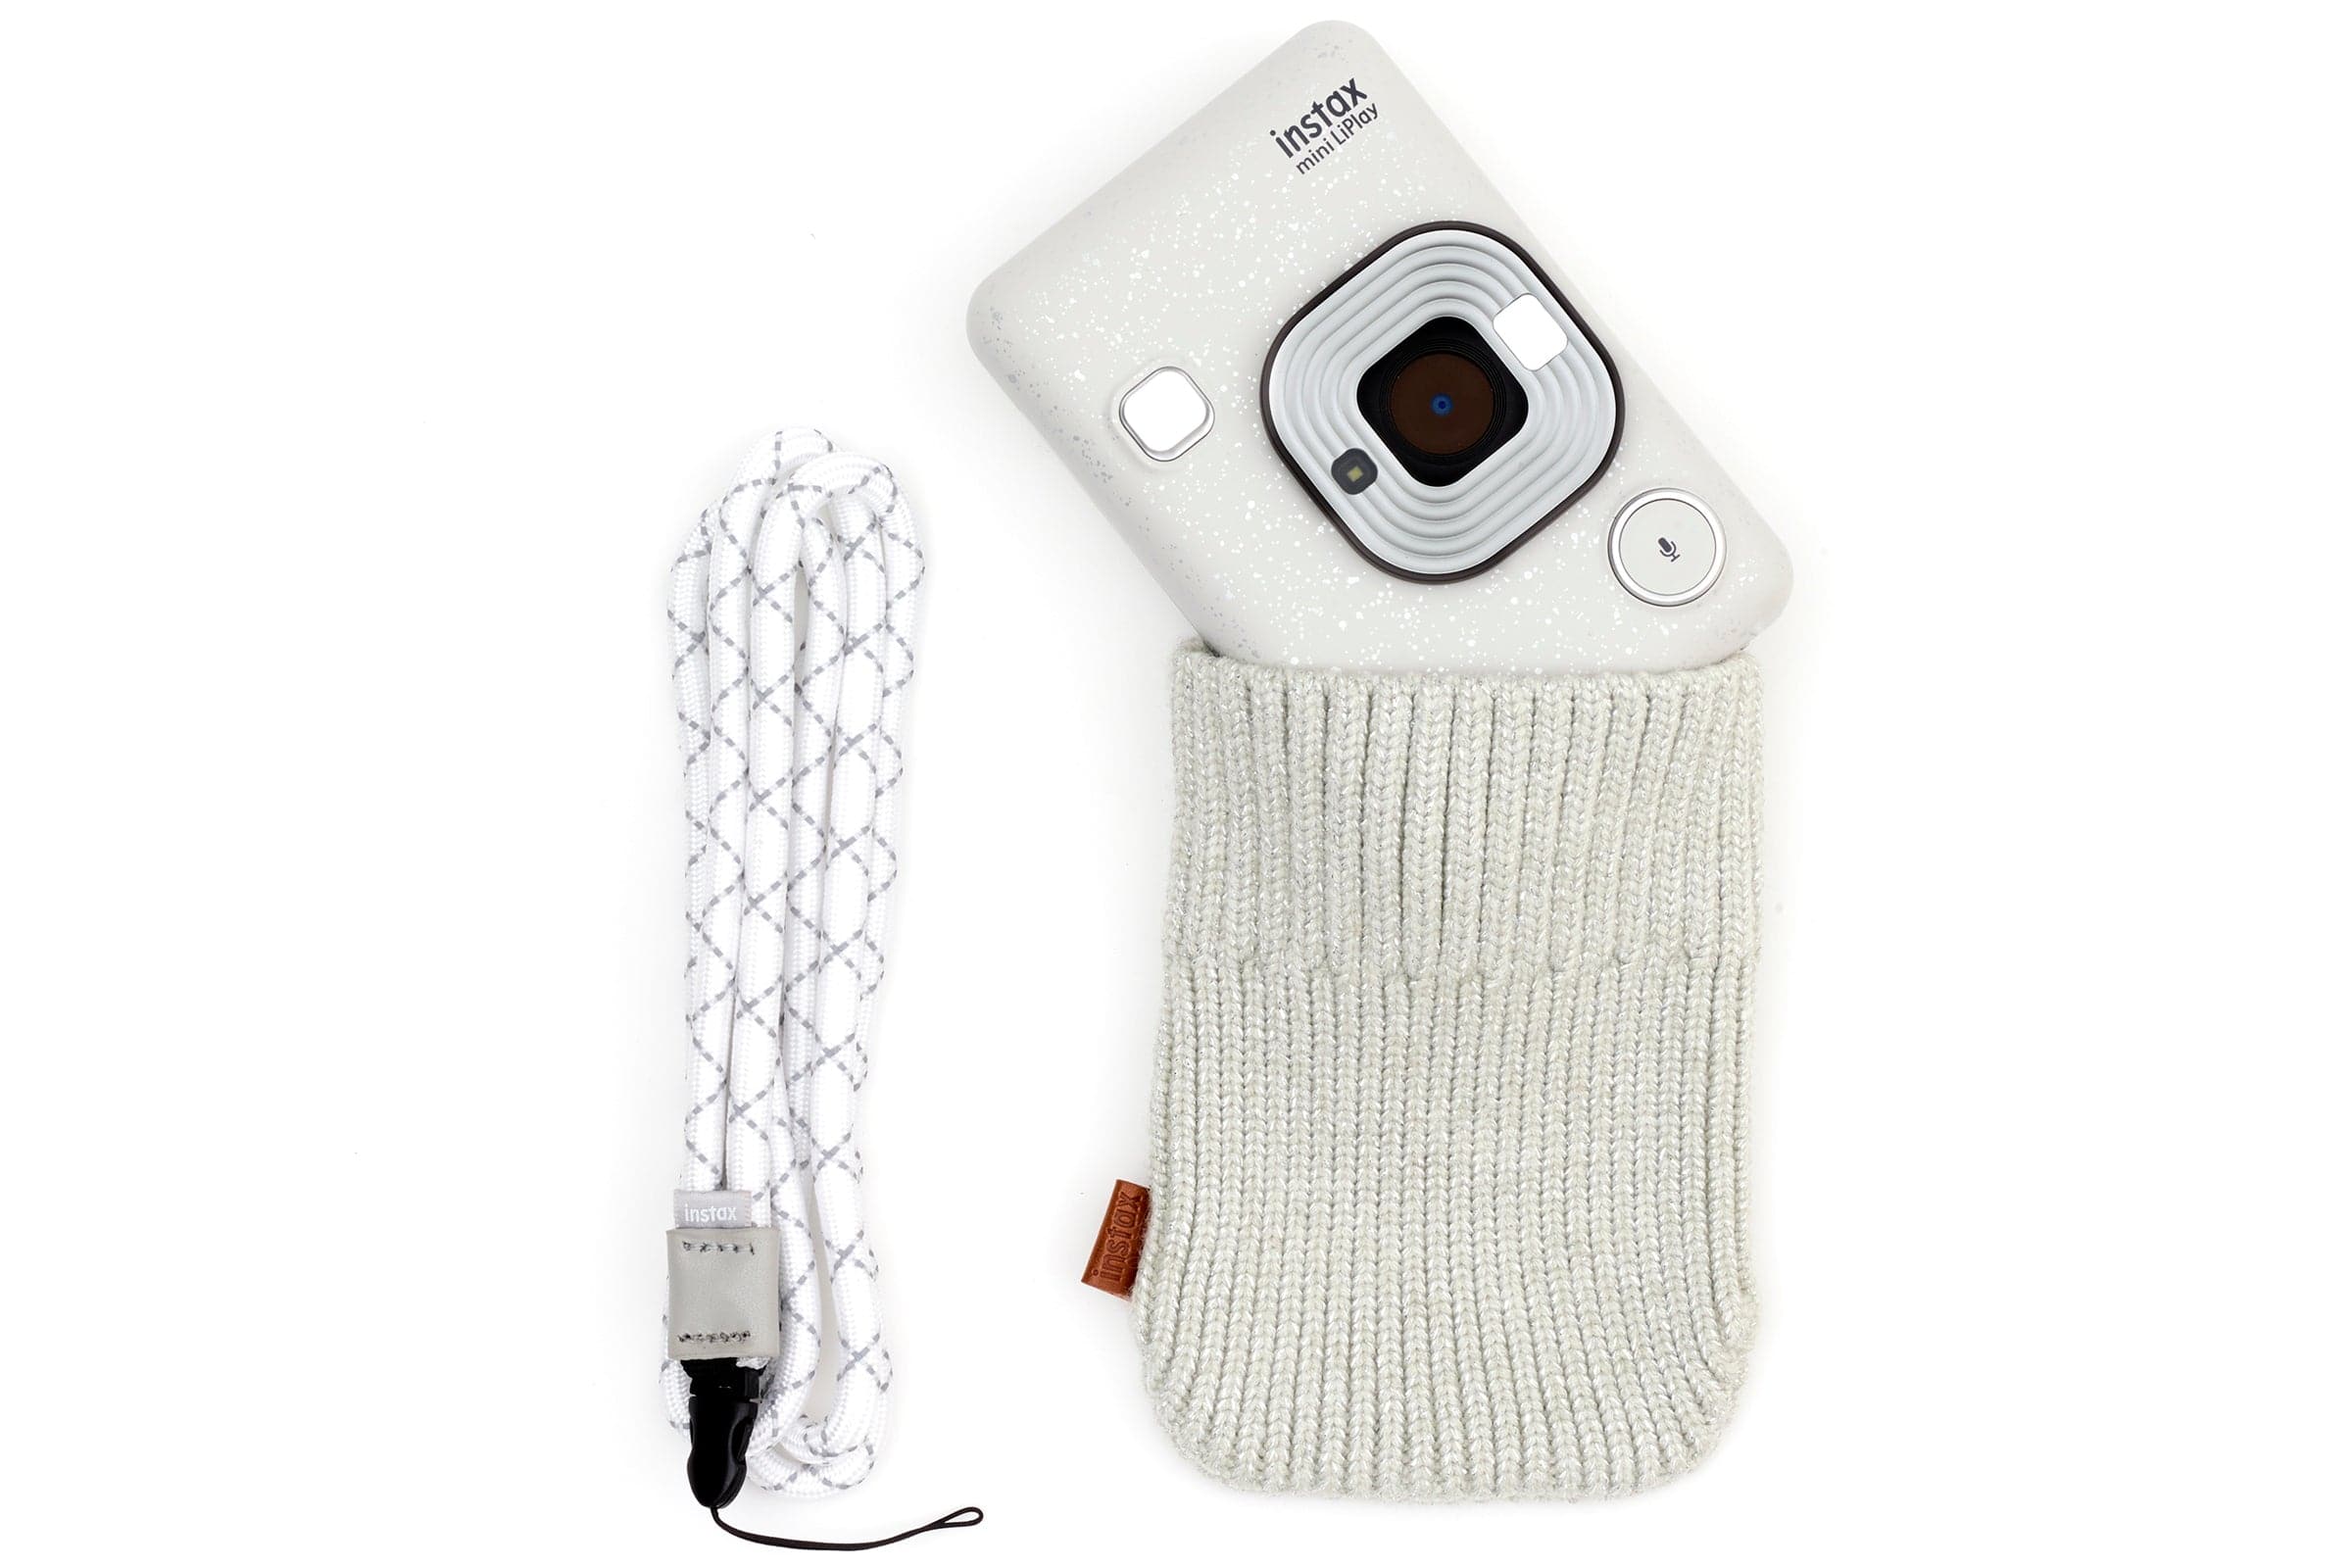 Fujifilm Instax Mini Liplay Accessory Kit with Neck Strap & Knitted Pouch - Stone White